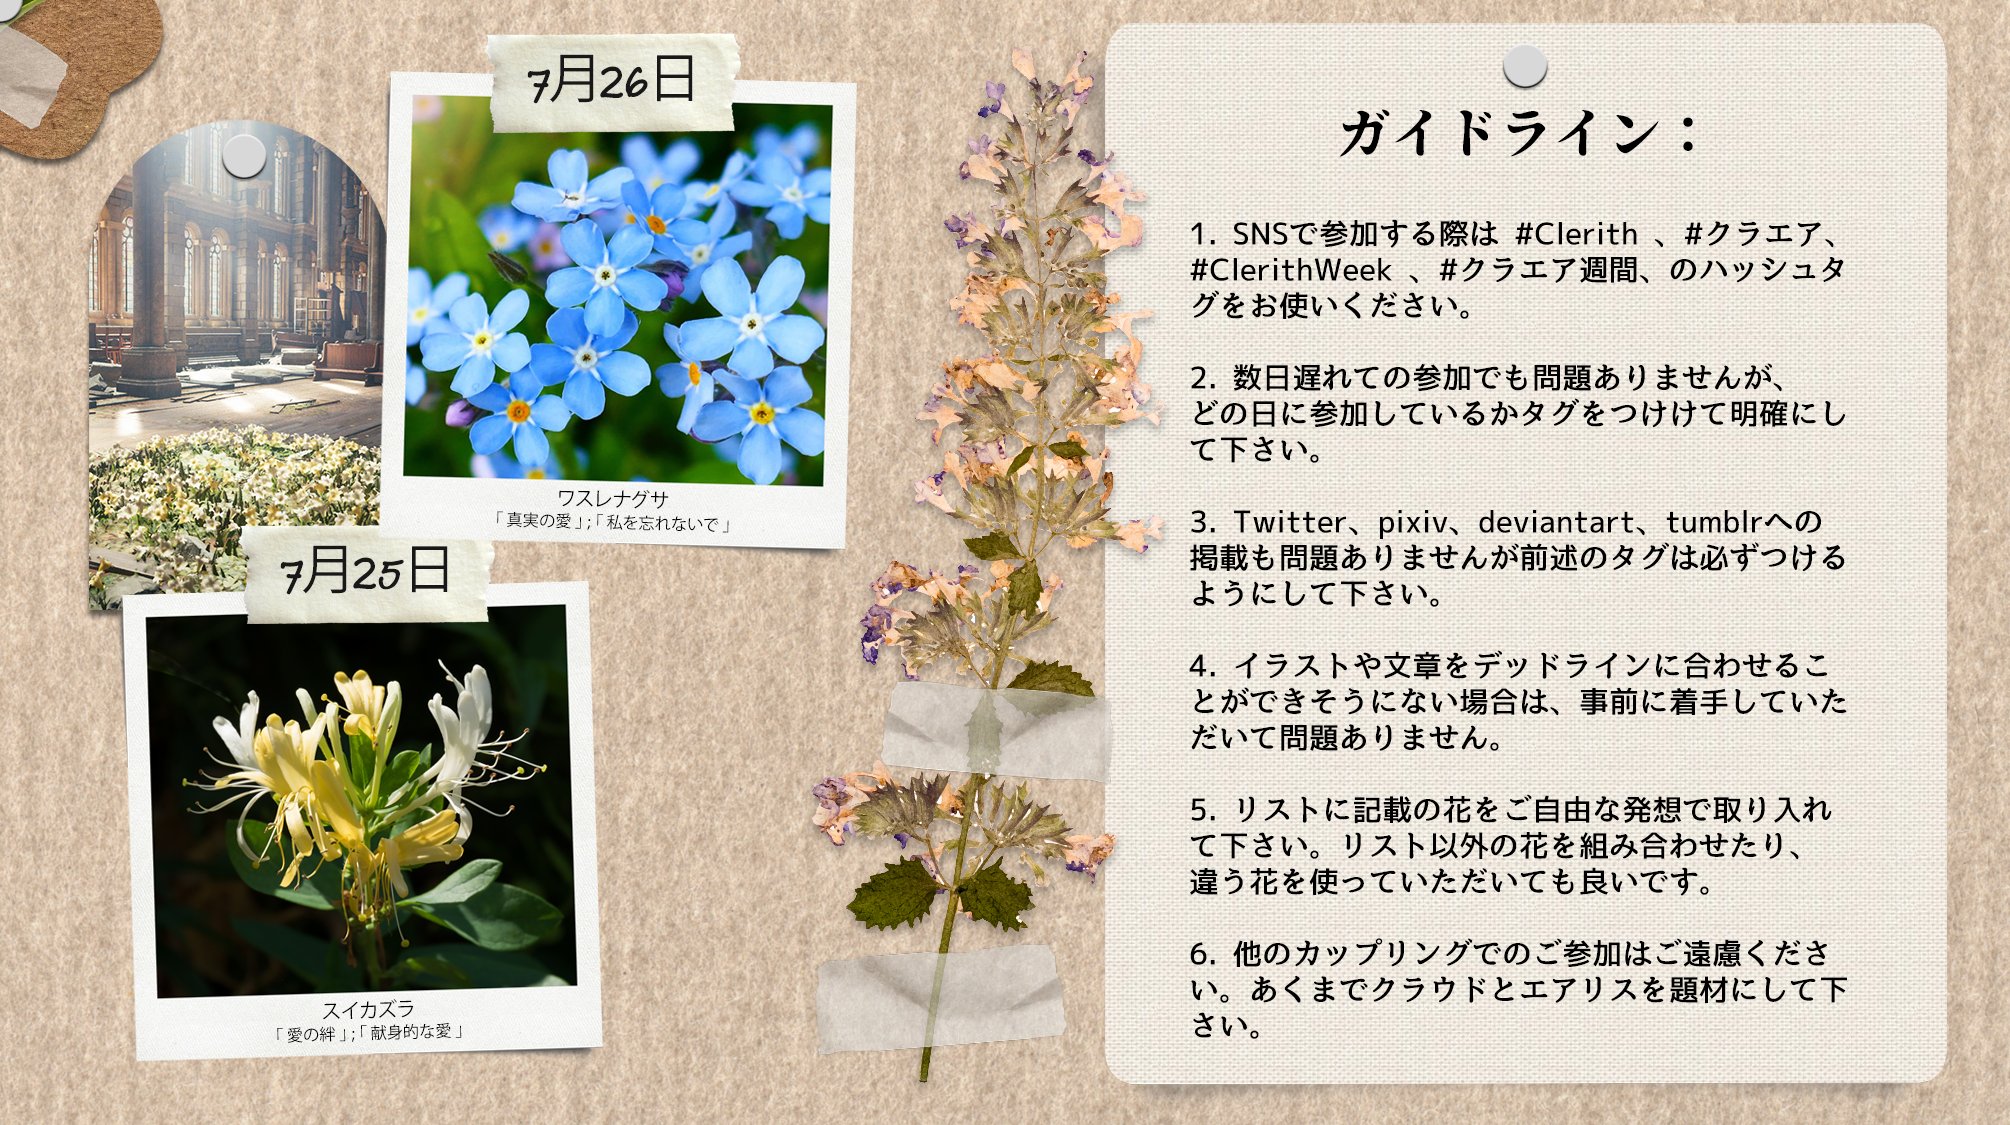 After The Rain Flowers Will Bloom Clerith Week Hanakotoba The Language Of Flowers Clerith Week 21 Update Please Be Advised Of The New Dates For This